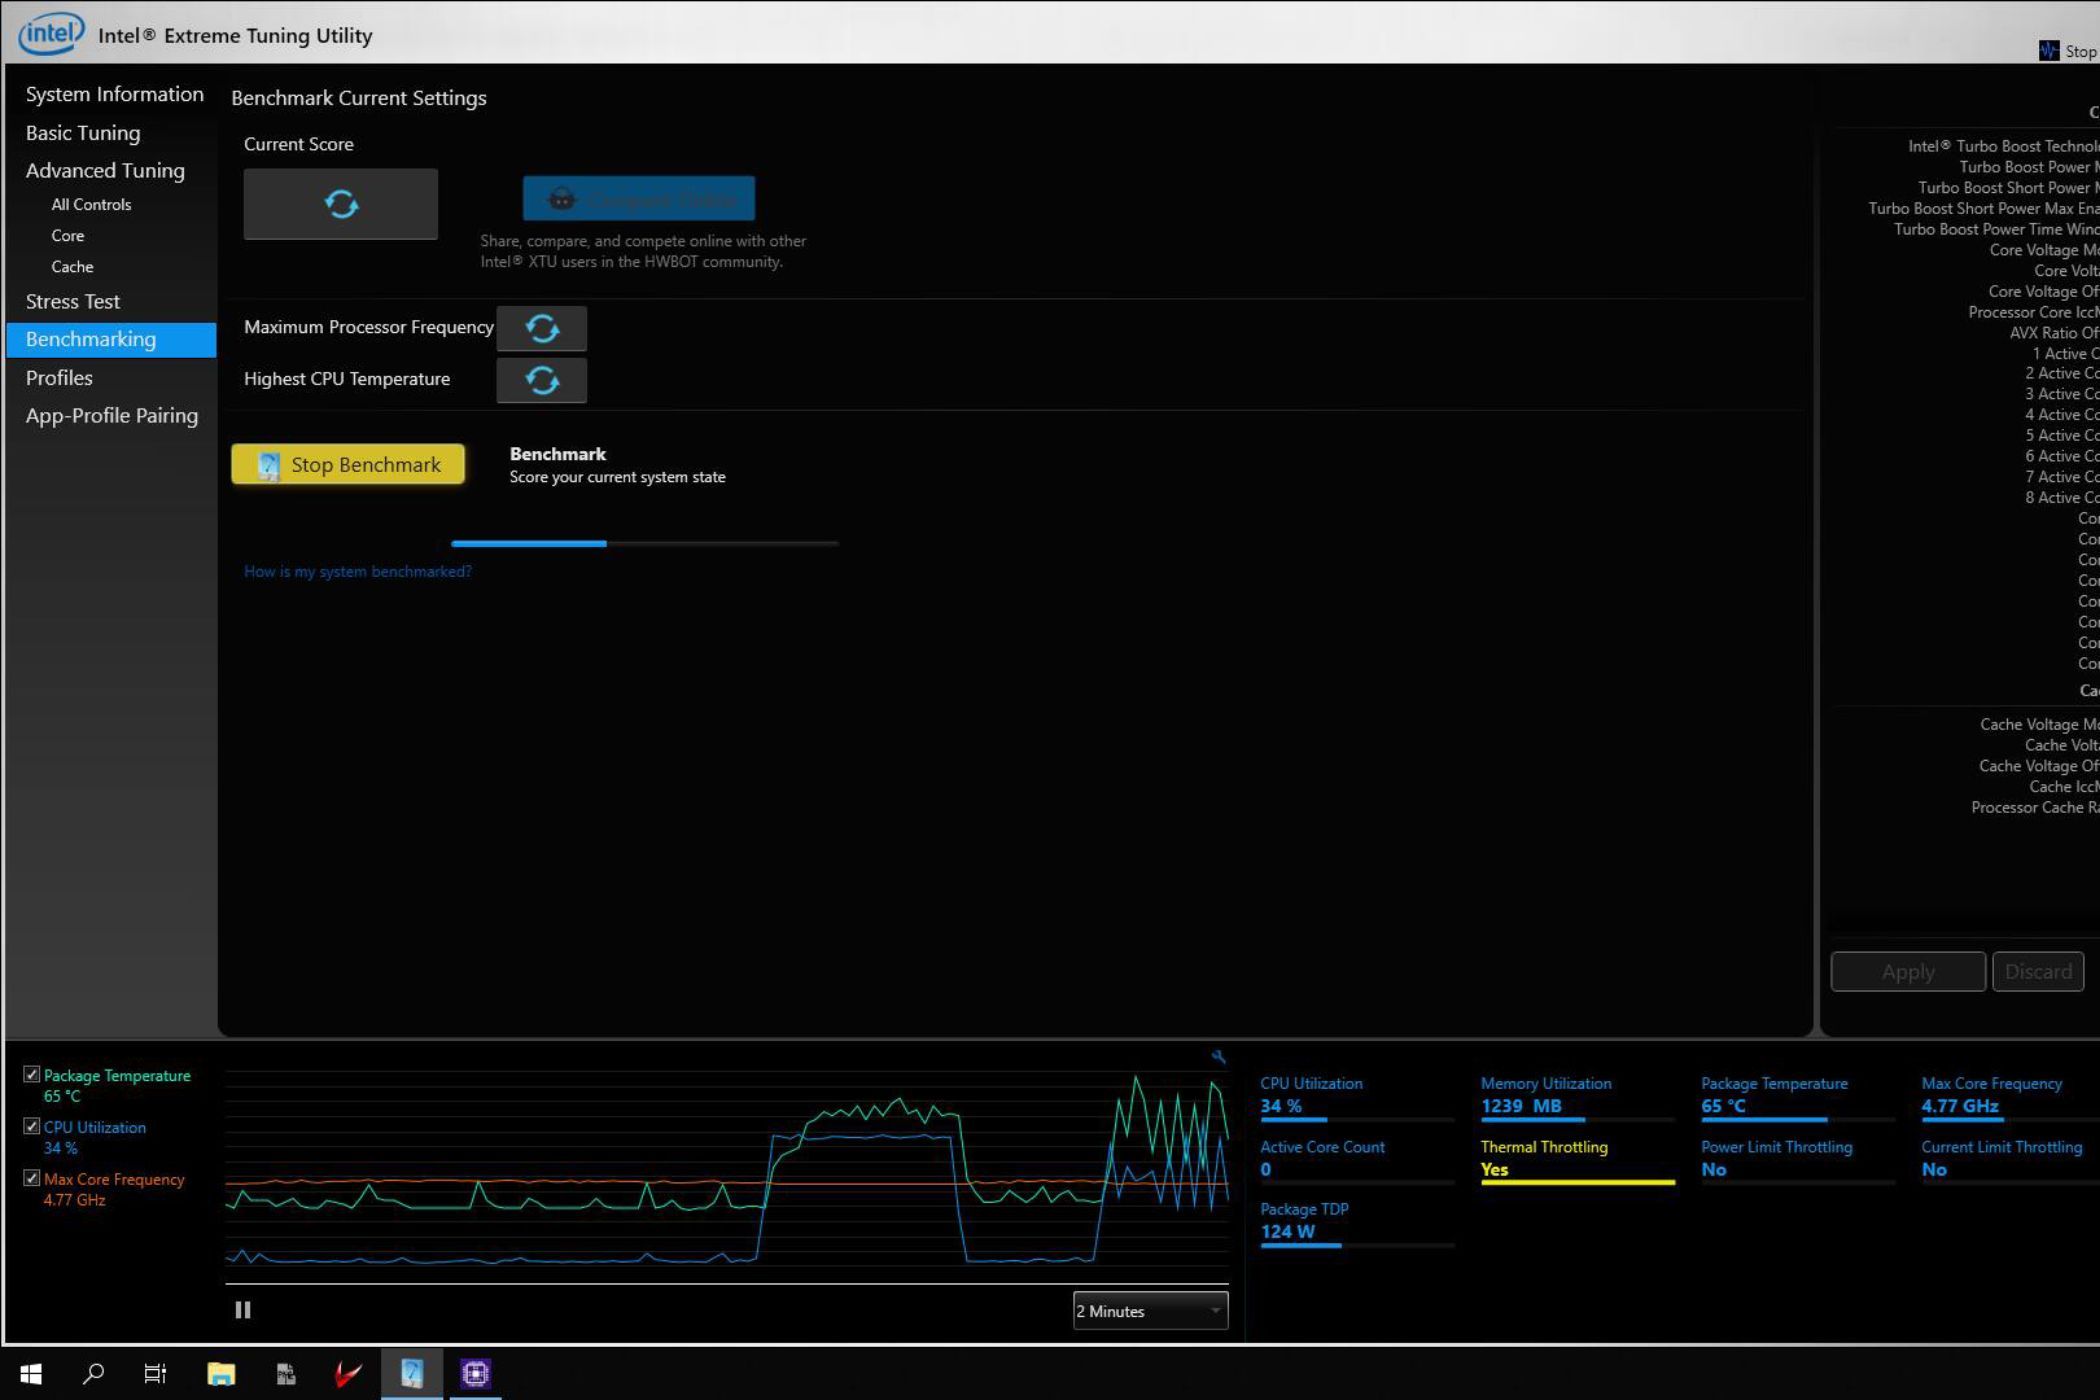 A screenshot showing the Intel Extreme tuning utility running a basic benchmark.